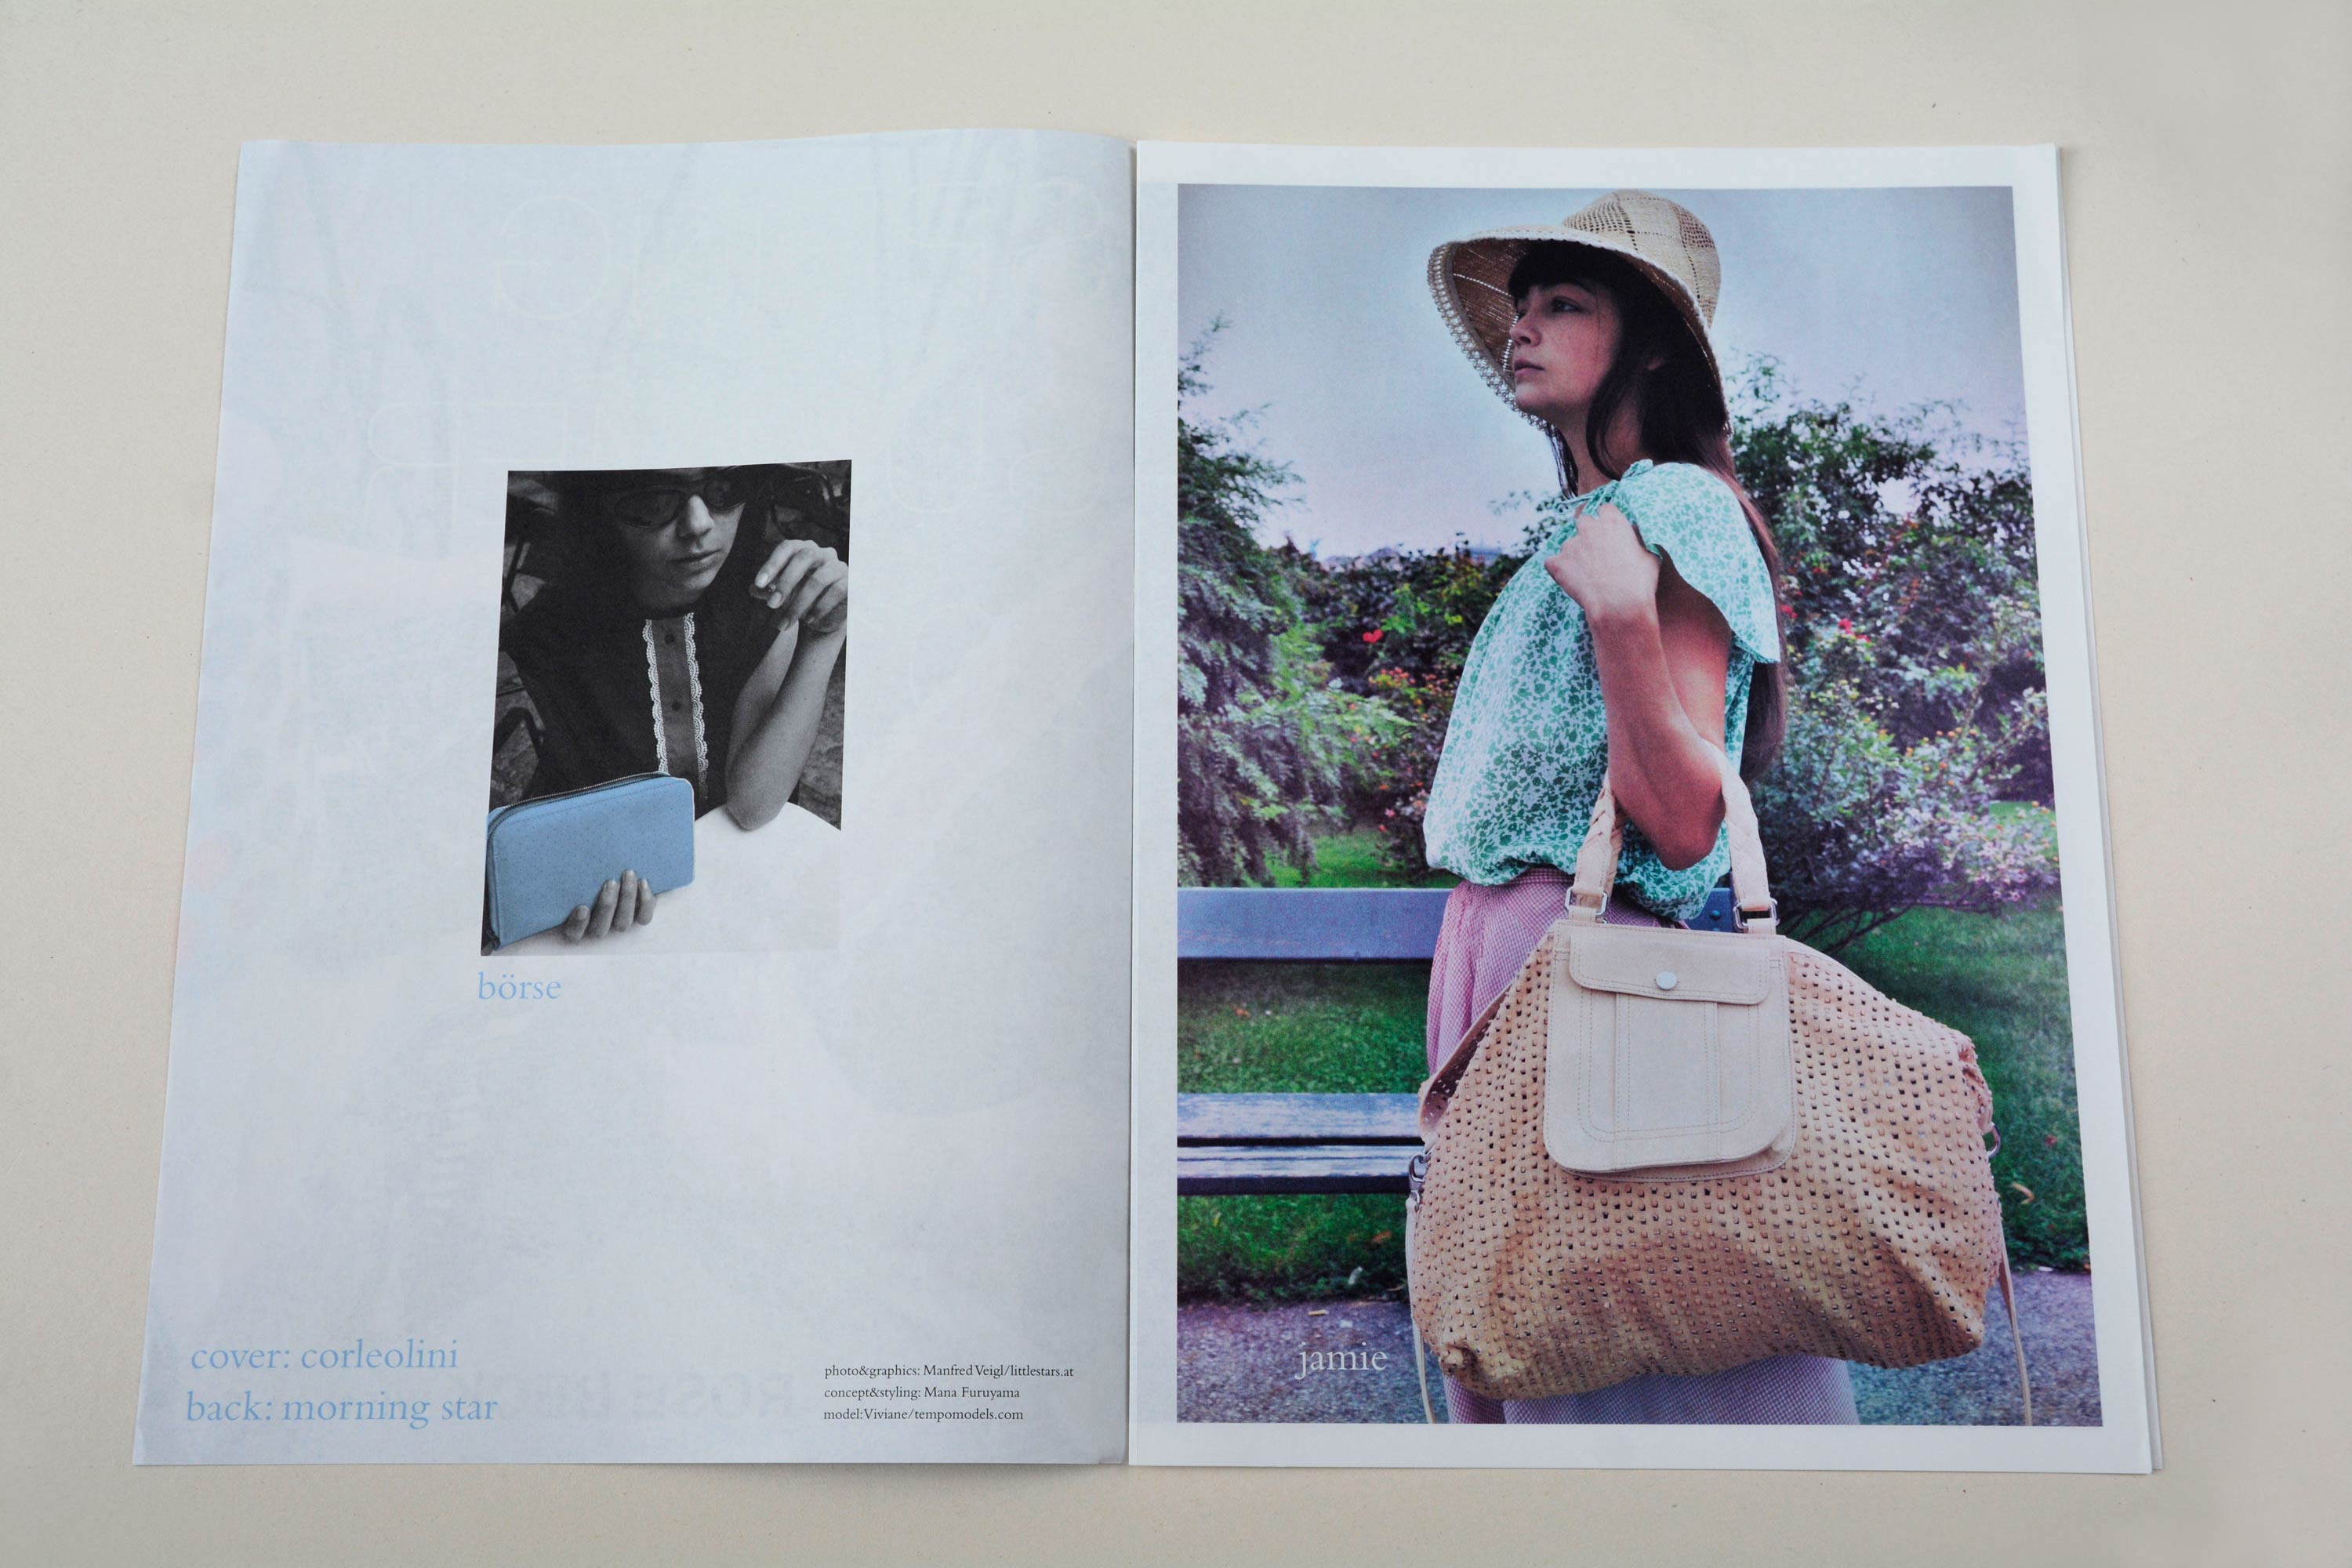 Double page. Left: Small b/w photo in center. Woman holding pouch. Block of tetx at bottom. Right: Full-page photo with white space around. Woman standing in park. Large handbag hangs on her arm. Small font at bottom overlayed.